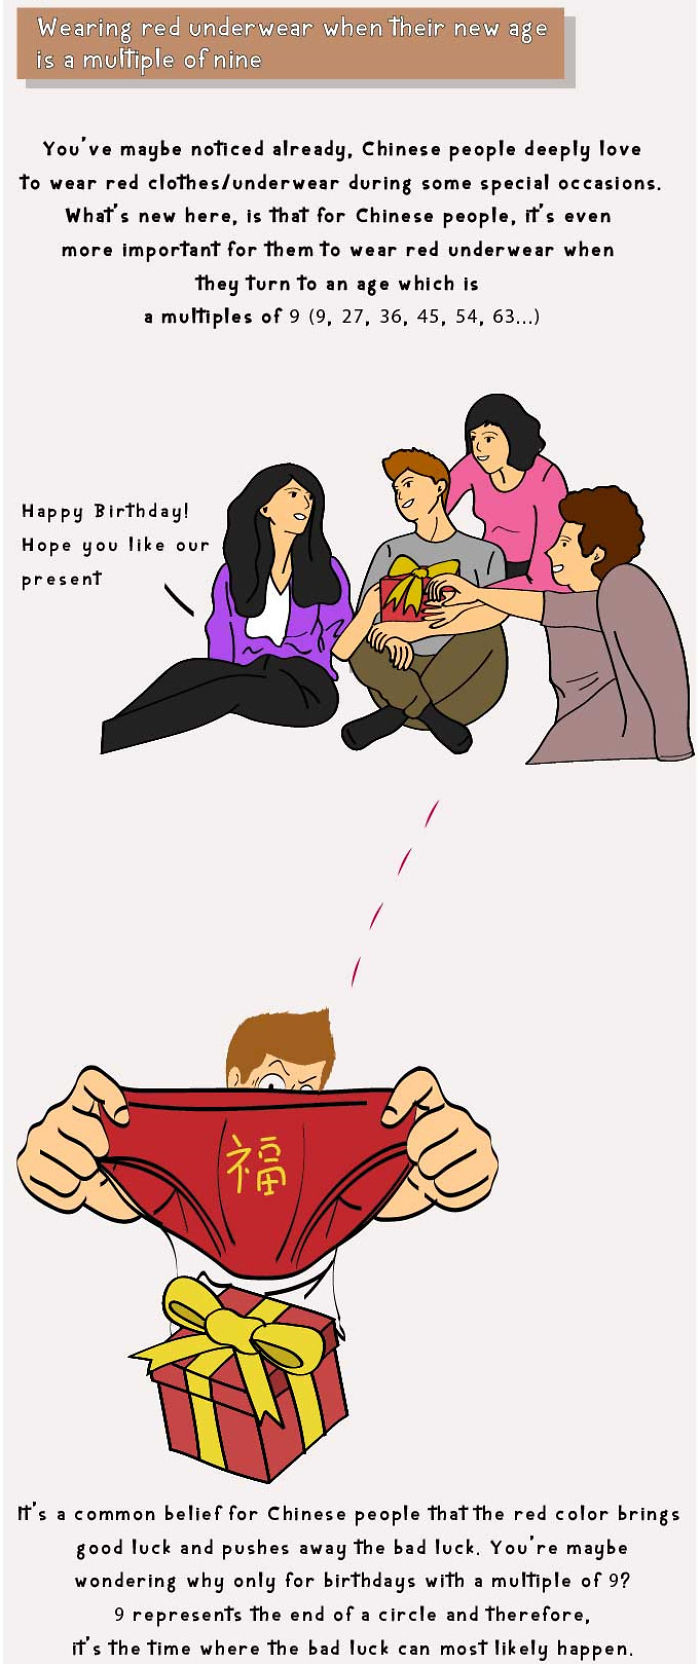 We Gathered A List Of The Best Chinese Superstitions That All Laowai (Foreigners) Must Know